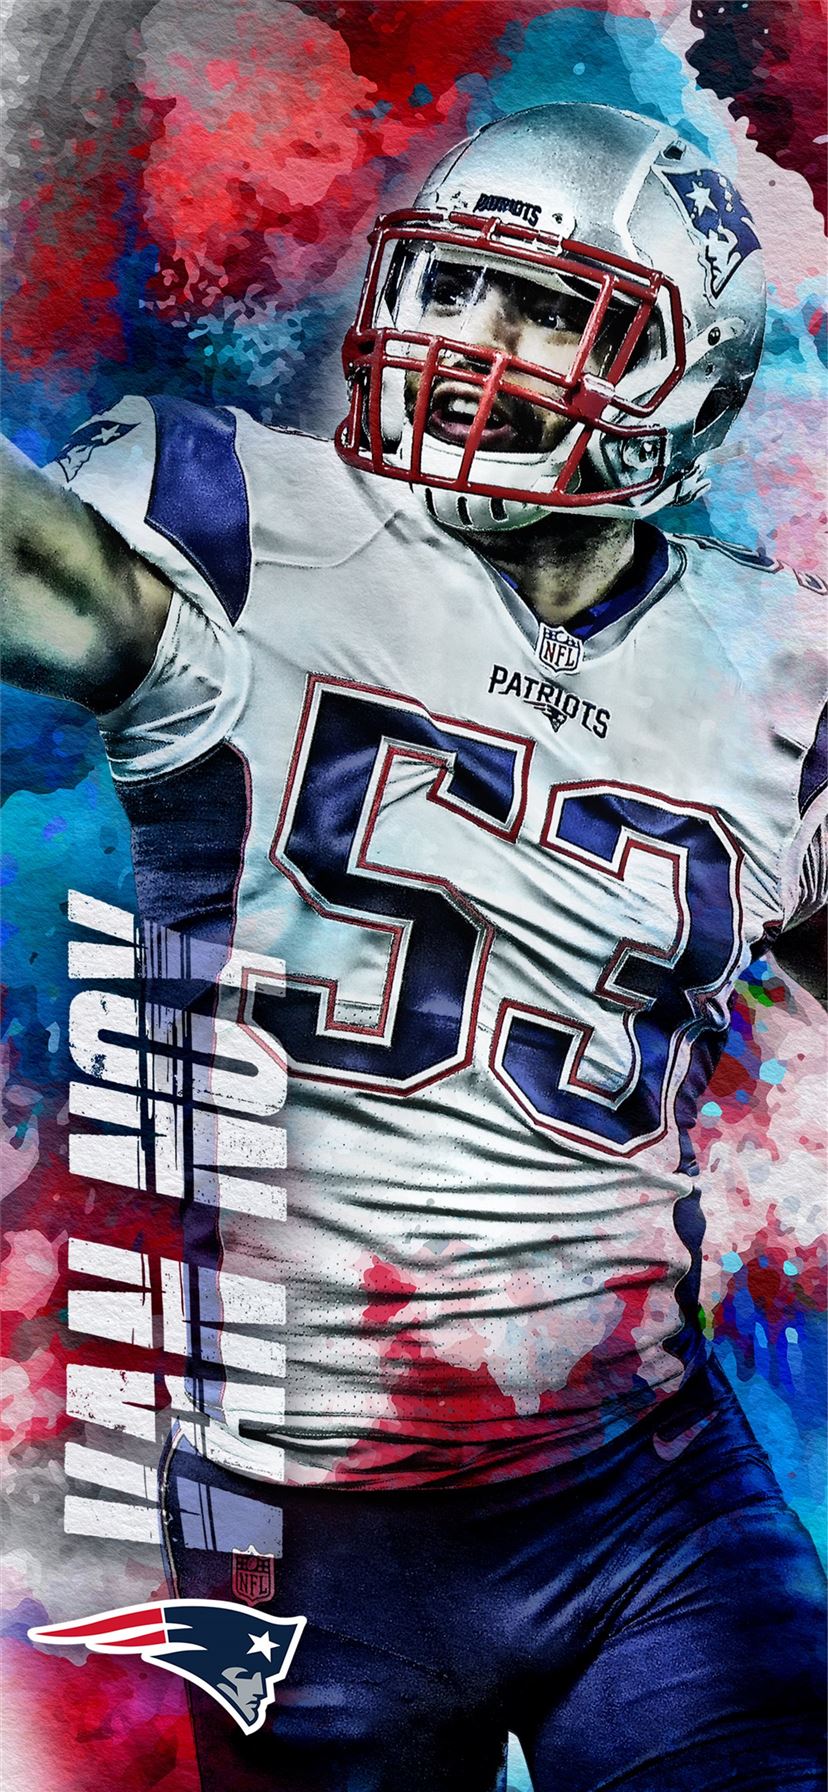 New England Patriots wallpaper by narcoTX  Download on ZEDGE  a167